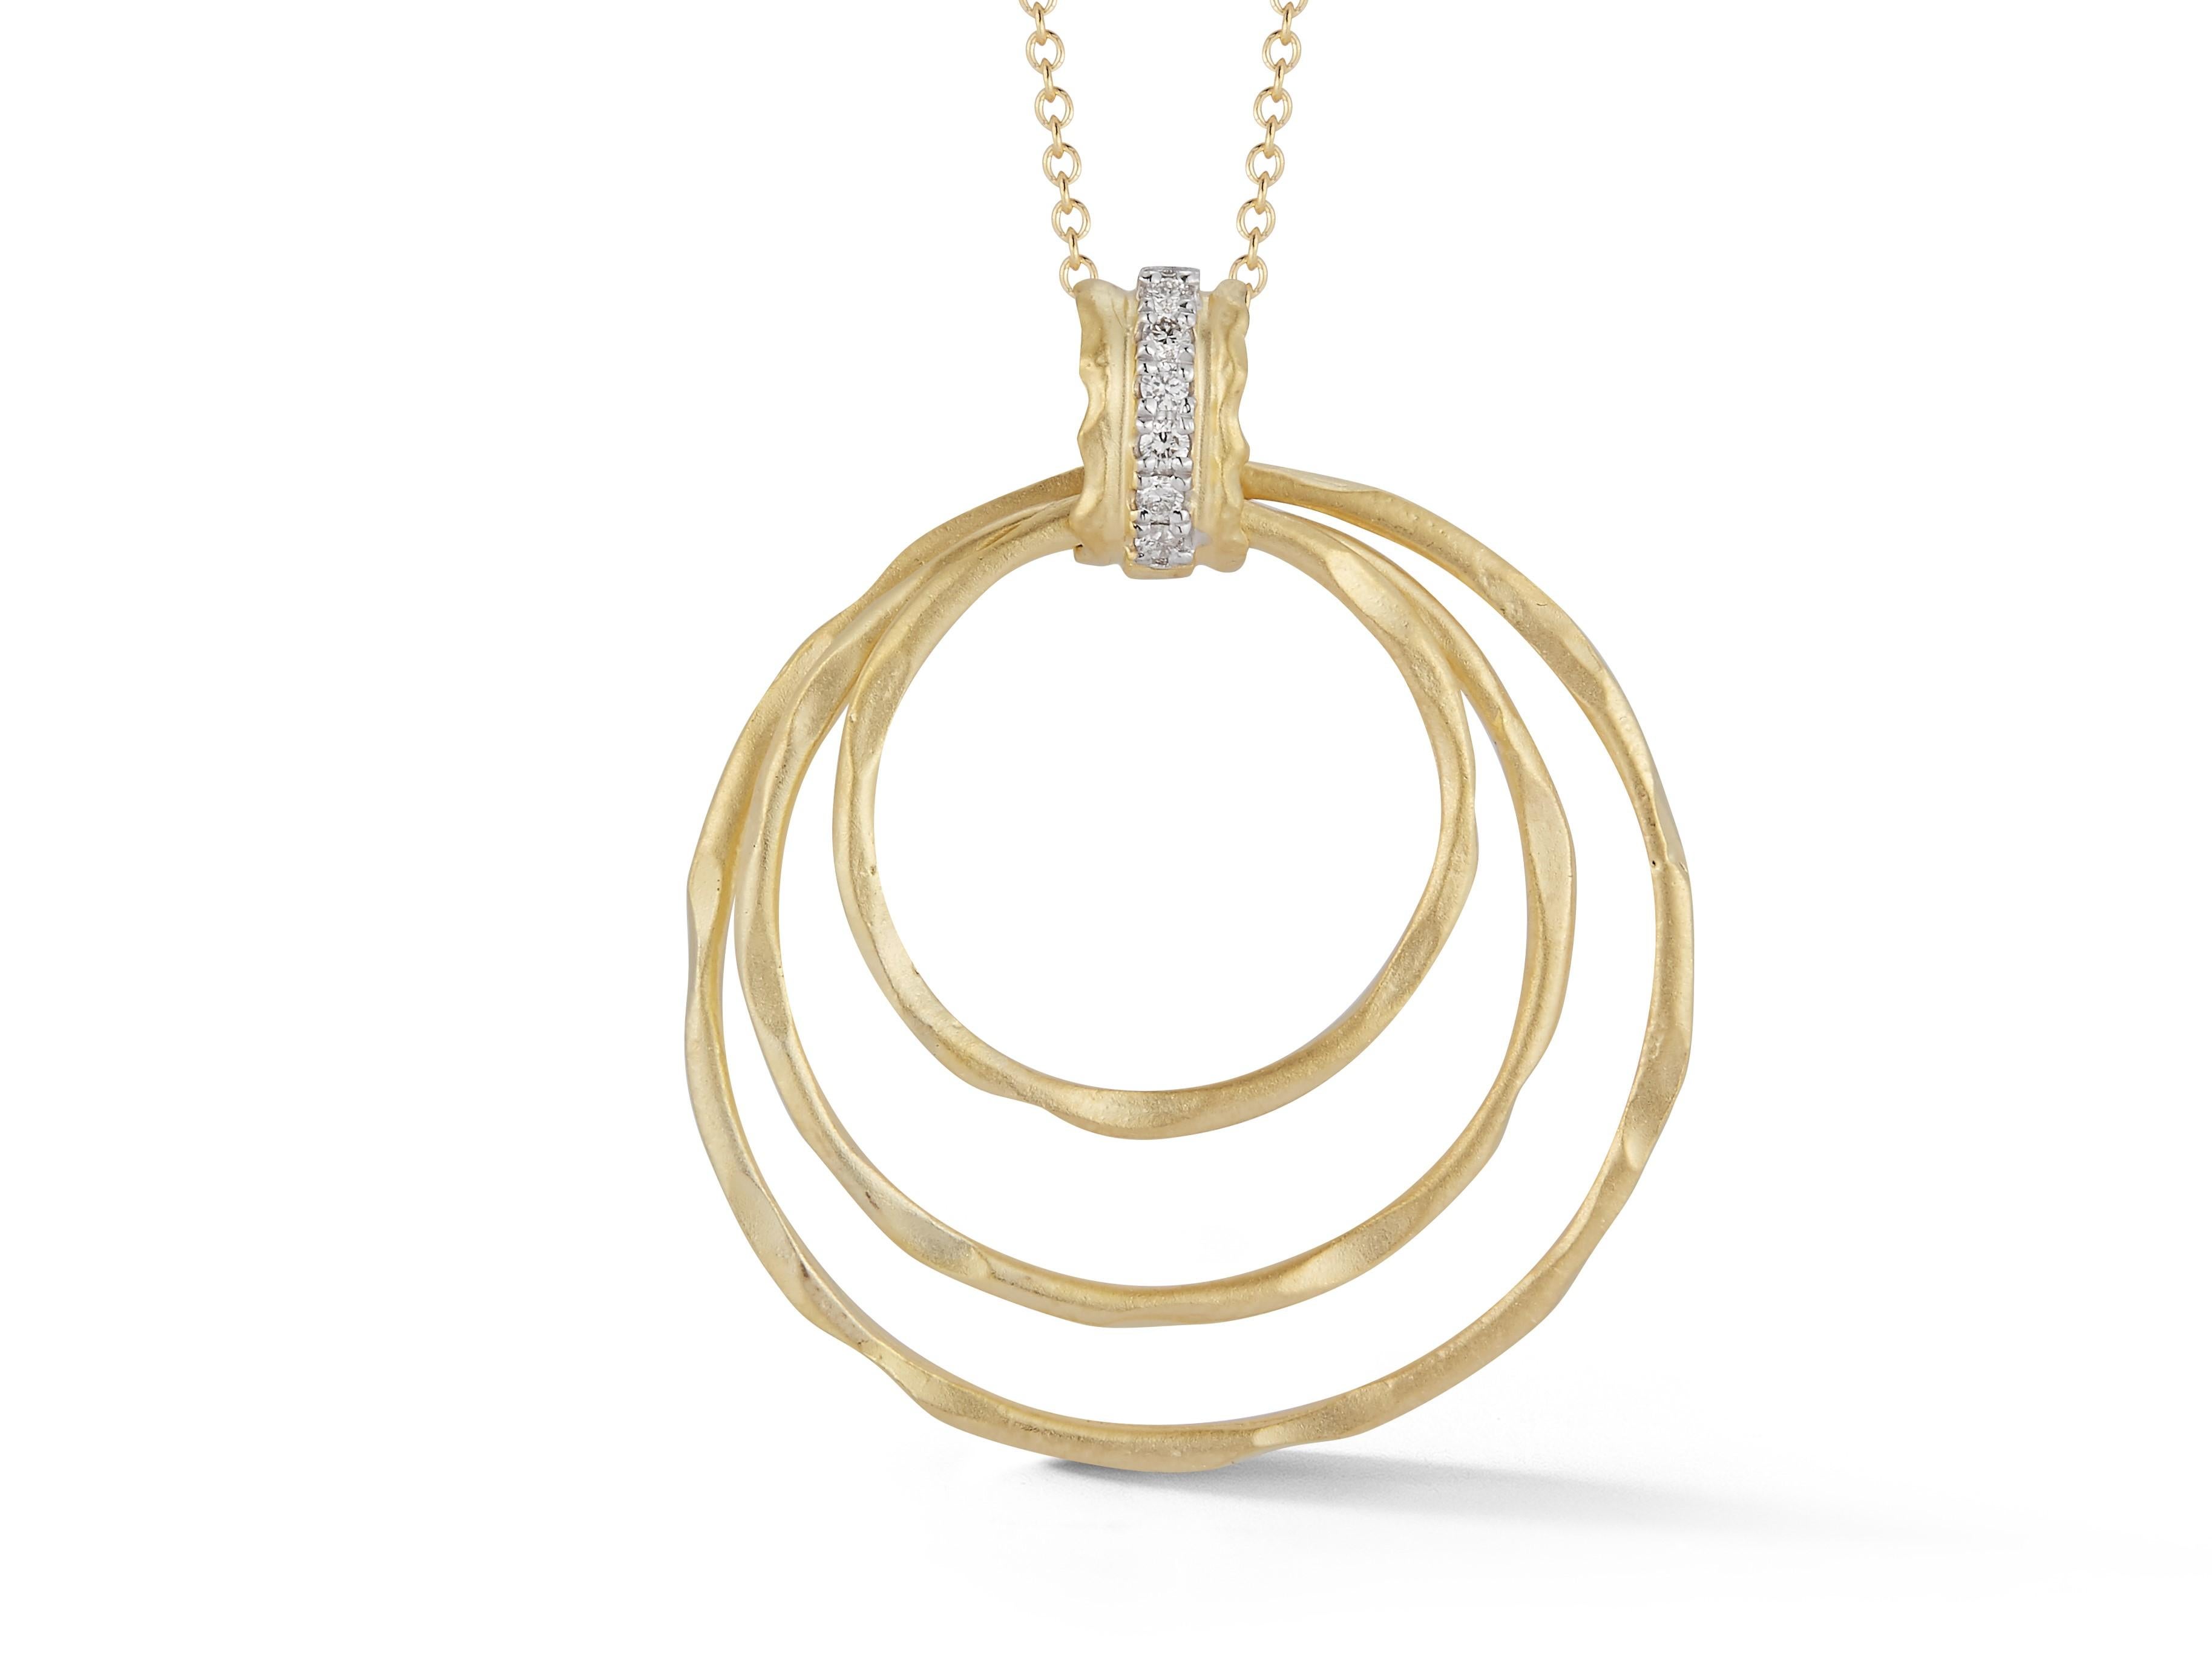 14 Karat Yellow Gold Hand-Crafted Matte and Hammer-Finished Cascading Circles Pendant, Accented with 0.06 Carats of a Pave Set Diamond Bale, Sliding on a 16